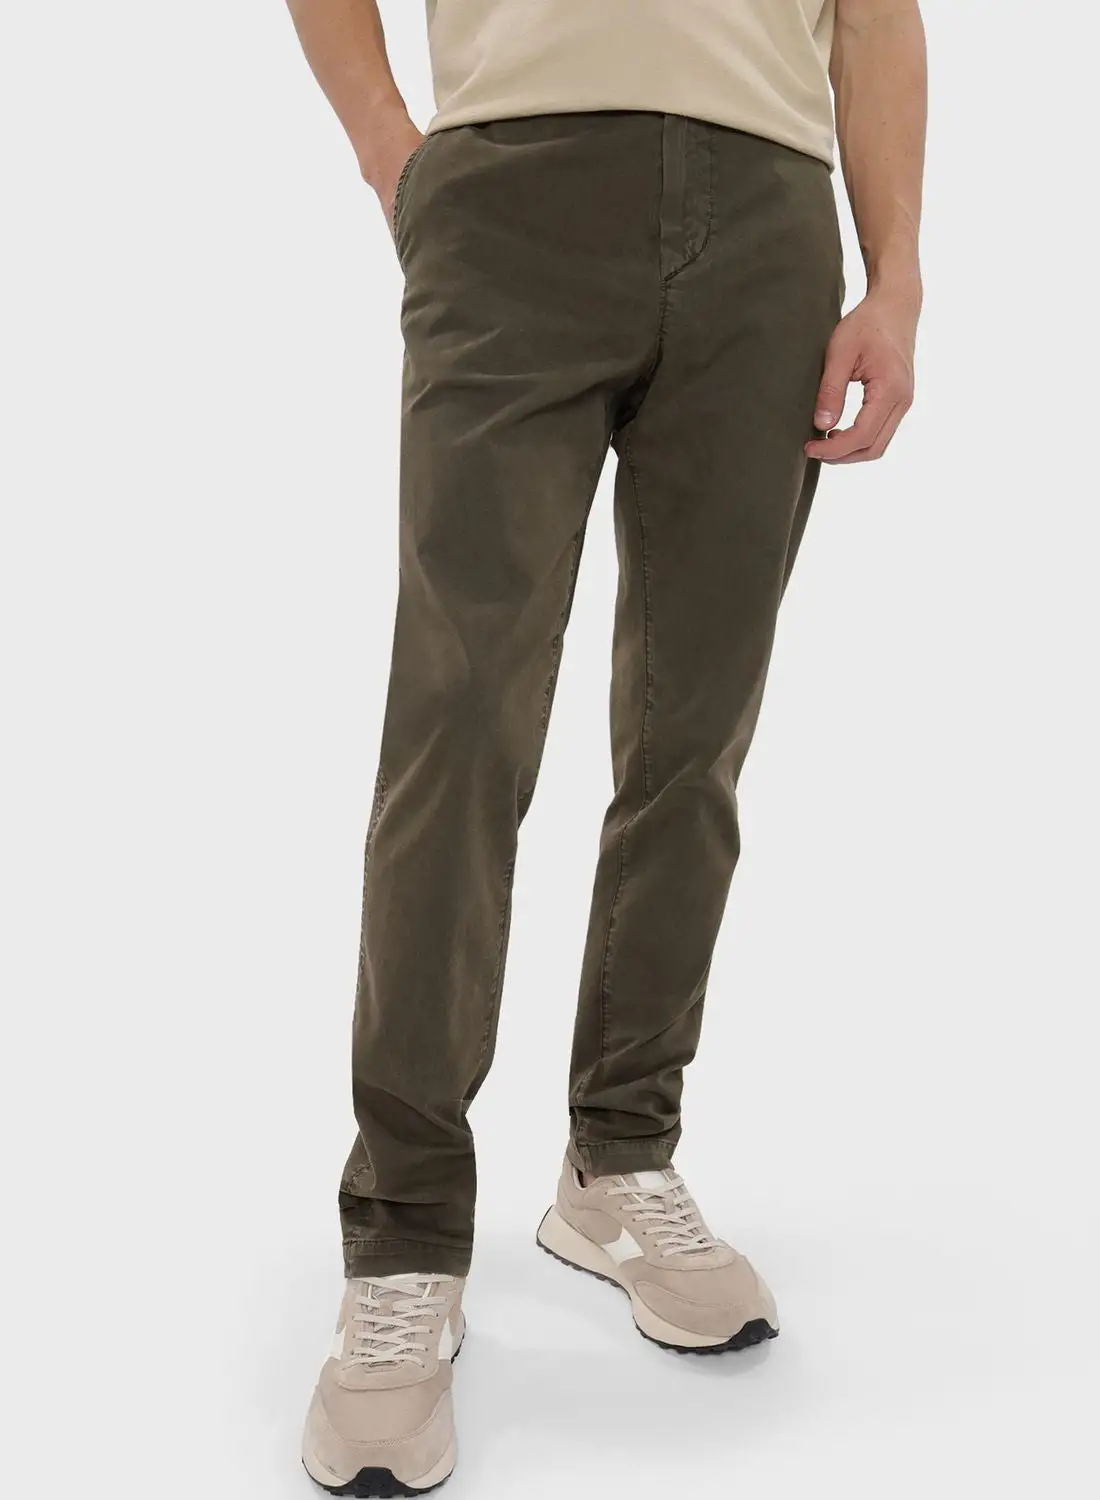 American Eagle Essential Chino Pants